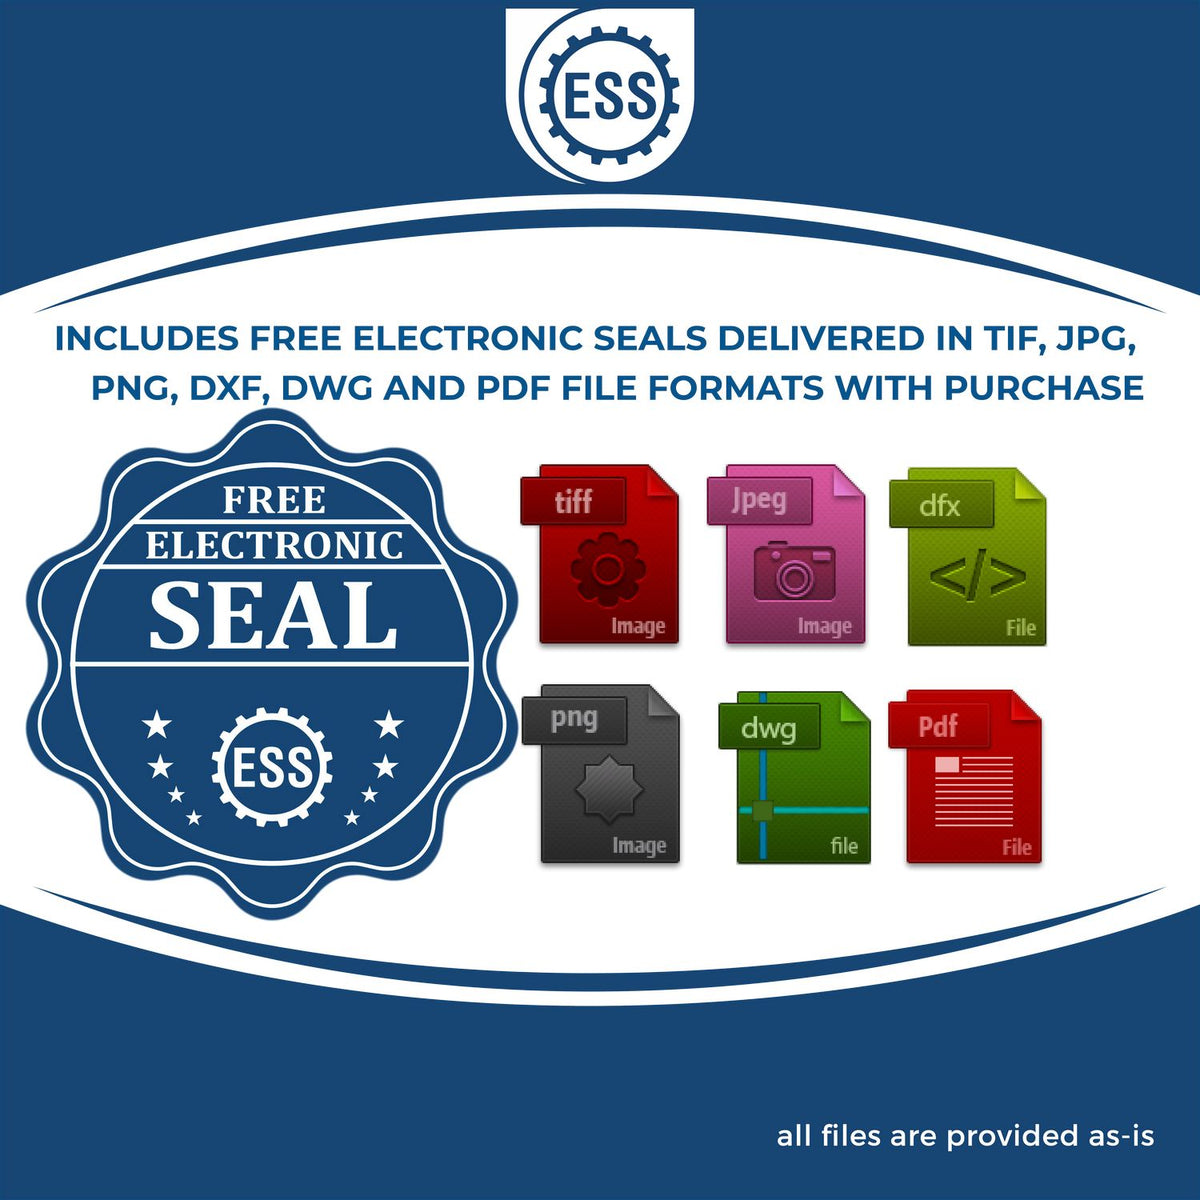 An infographic for the free electronic seal for the PSI Oklahoma Notary Stamp illustrating the different file type icons such as DXF, DWG, TIF, JPG and PNG.